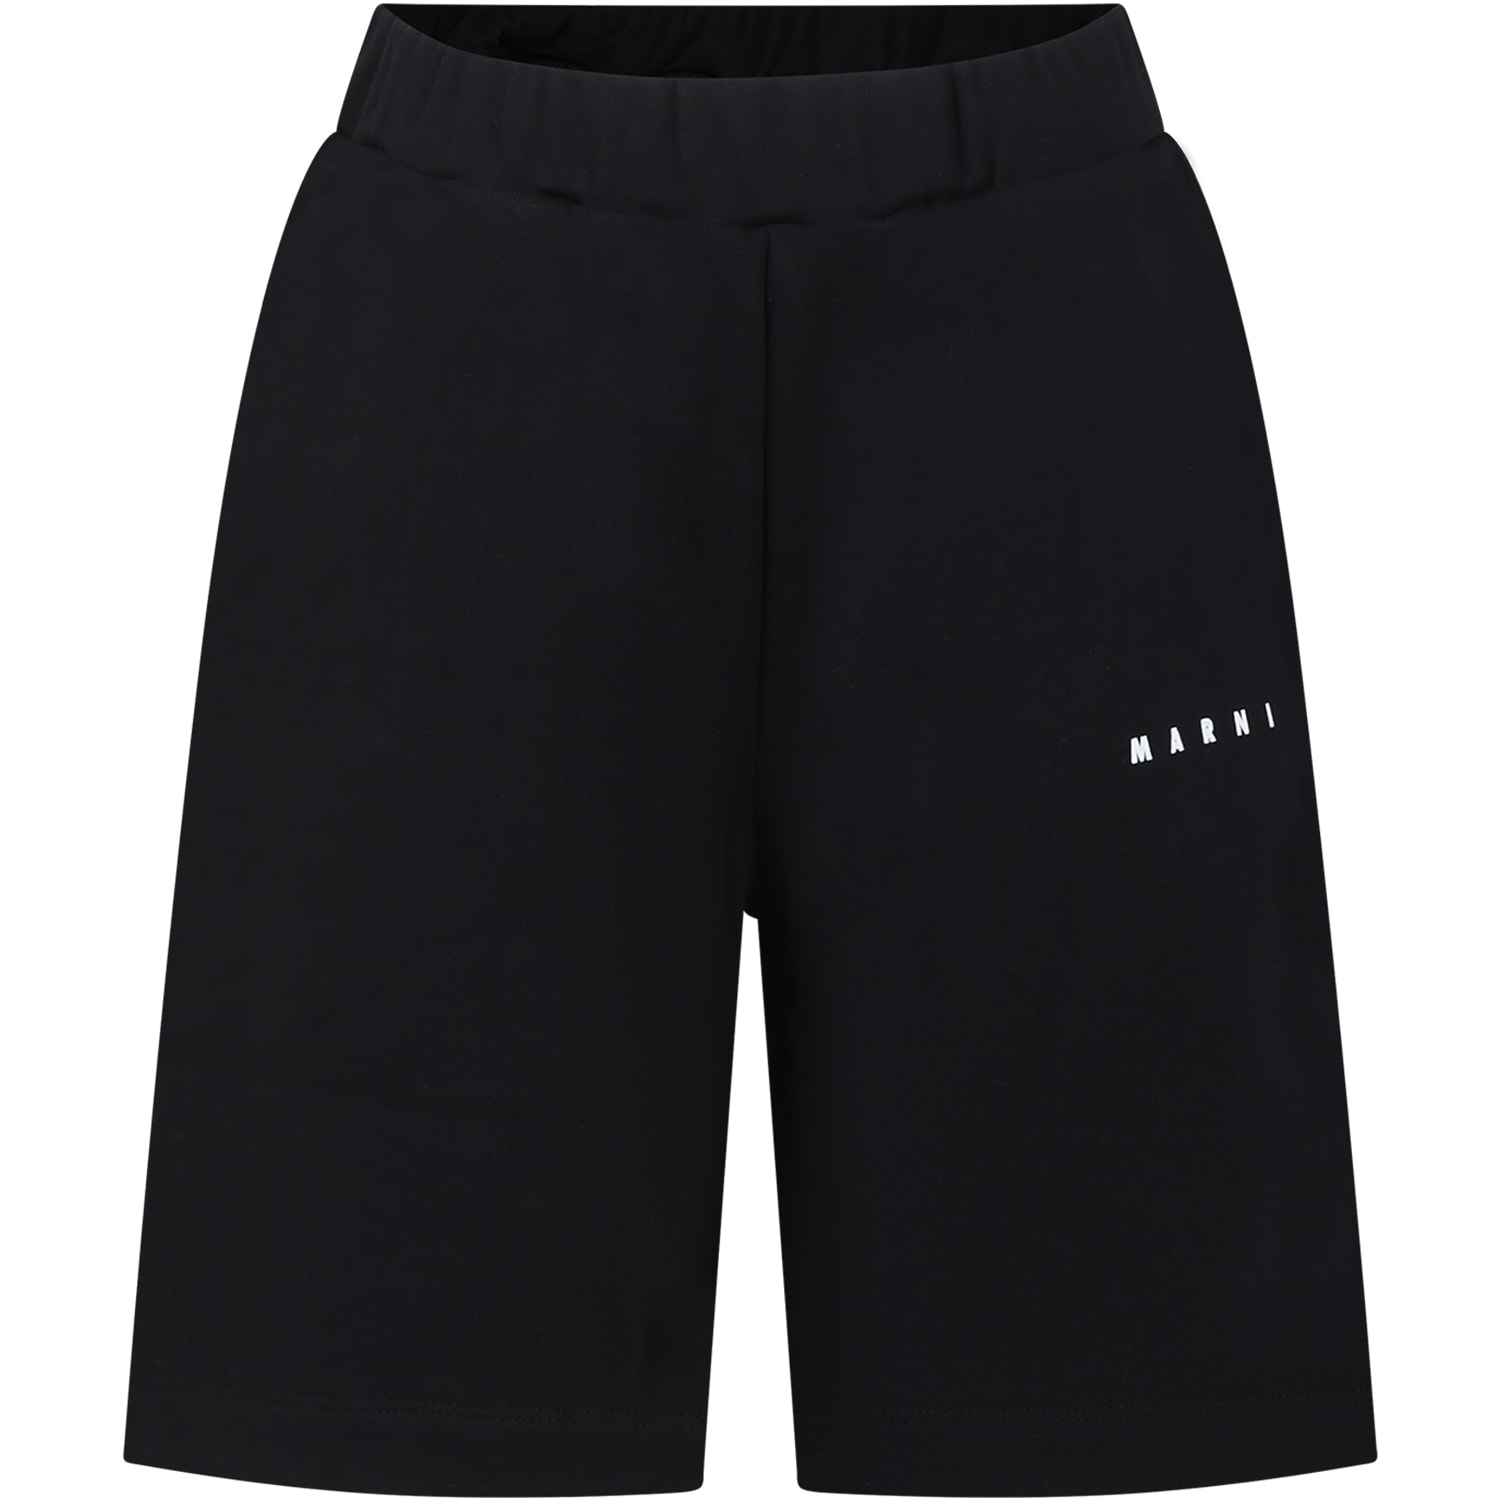 Marni Black Shorts For Kids With Logo